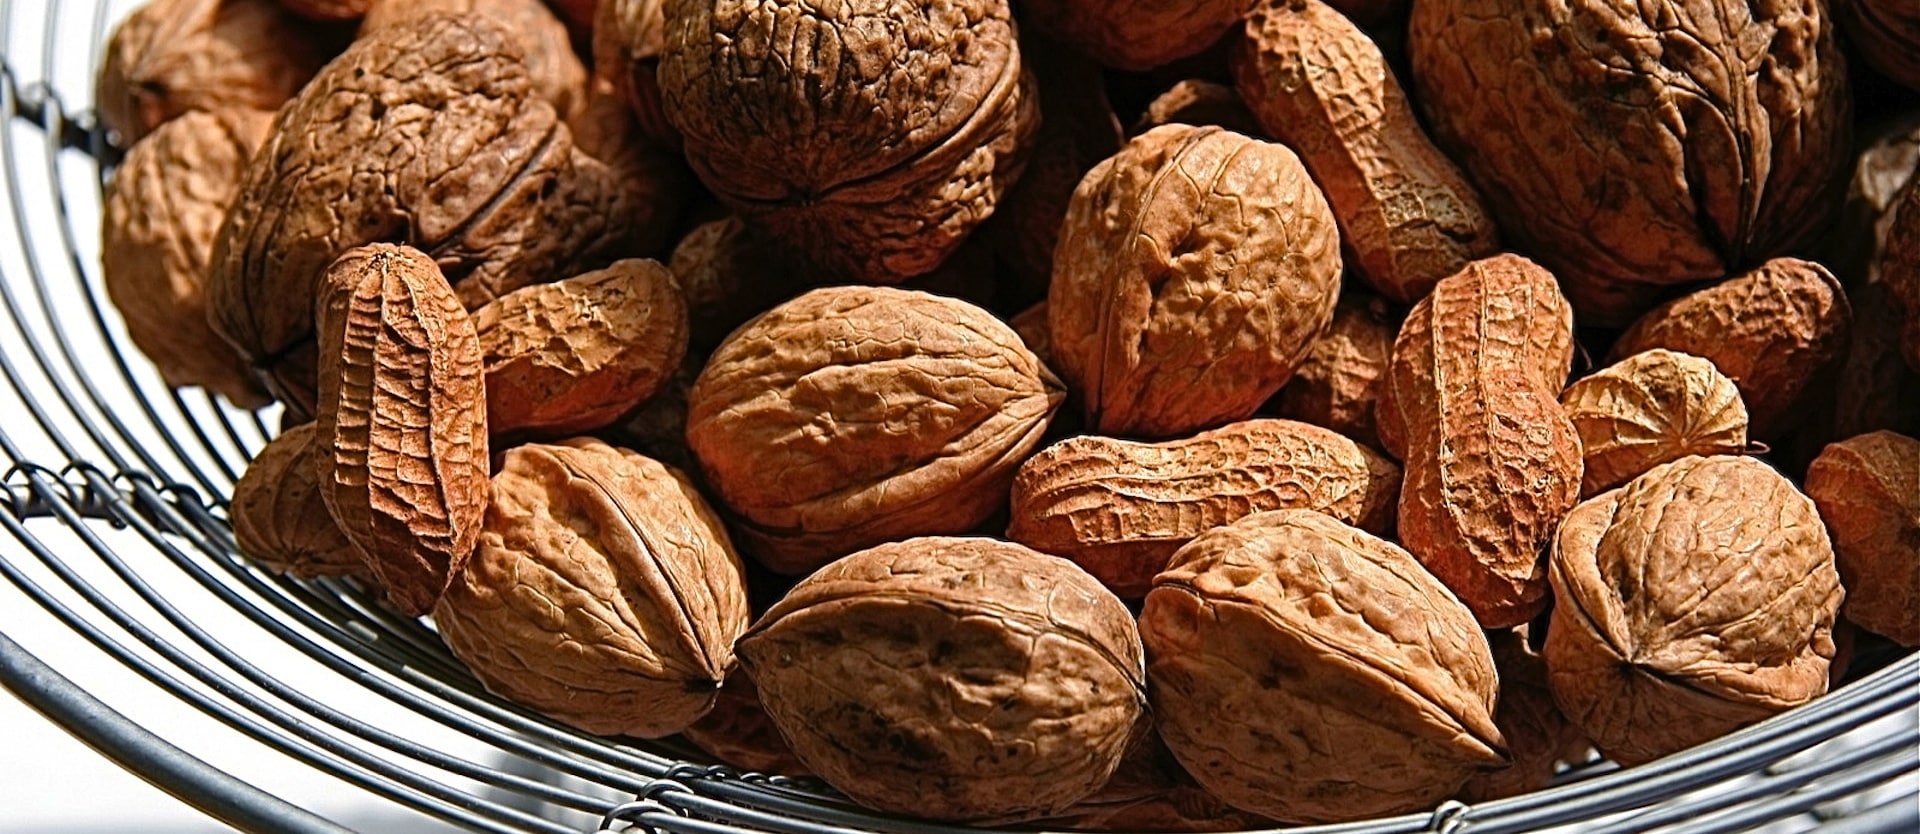 Nuts May Help Prevent Death